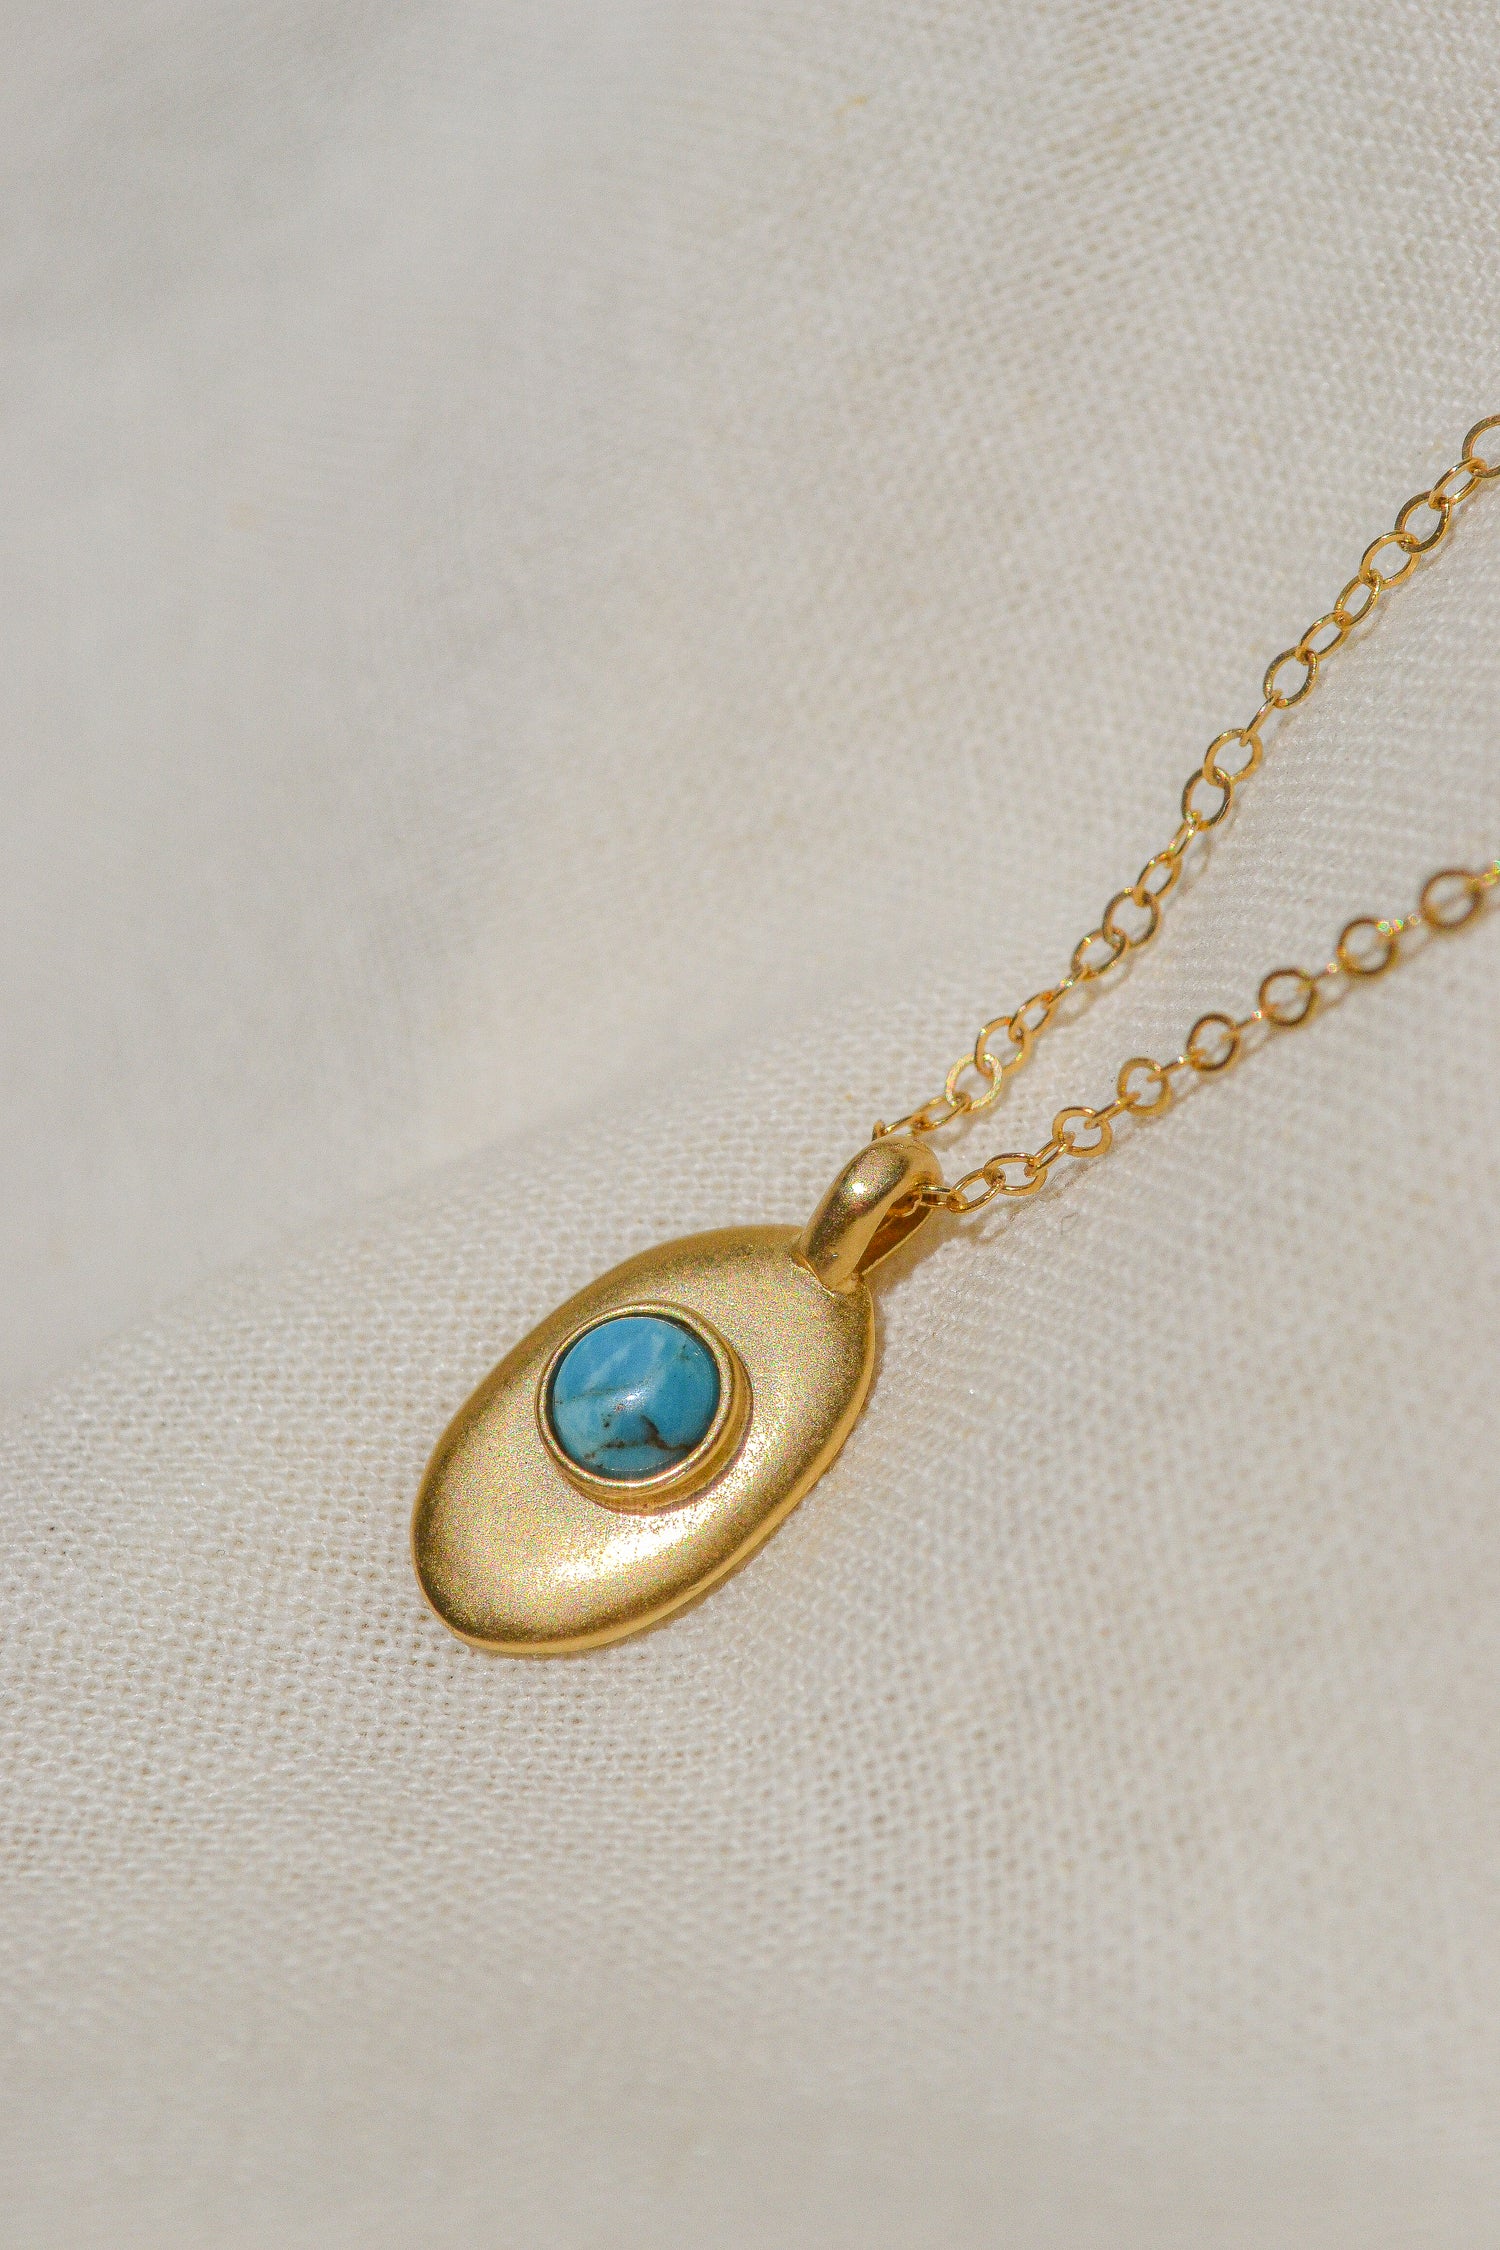 Sweet little handmade charm necklace featuring an ethically-mined turquoise stone. Available in bronze with gold plating and a gold filled chain or sterling silver chain.